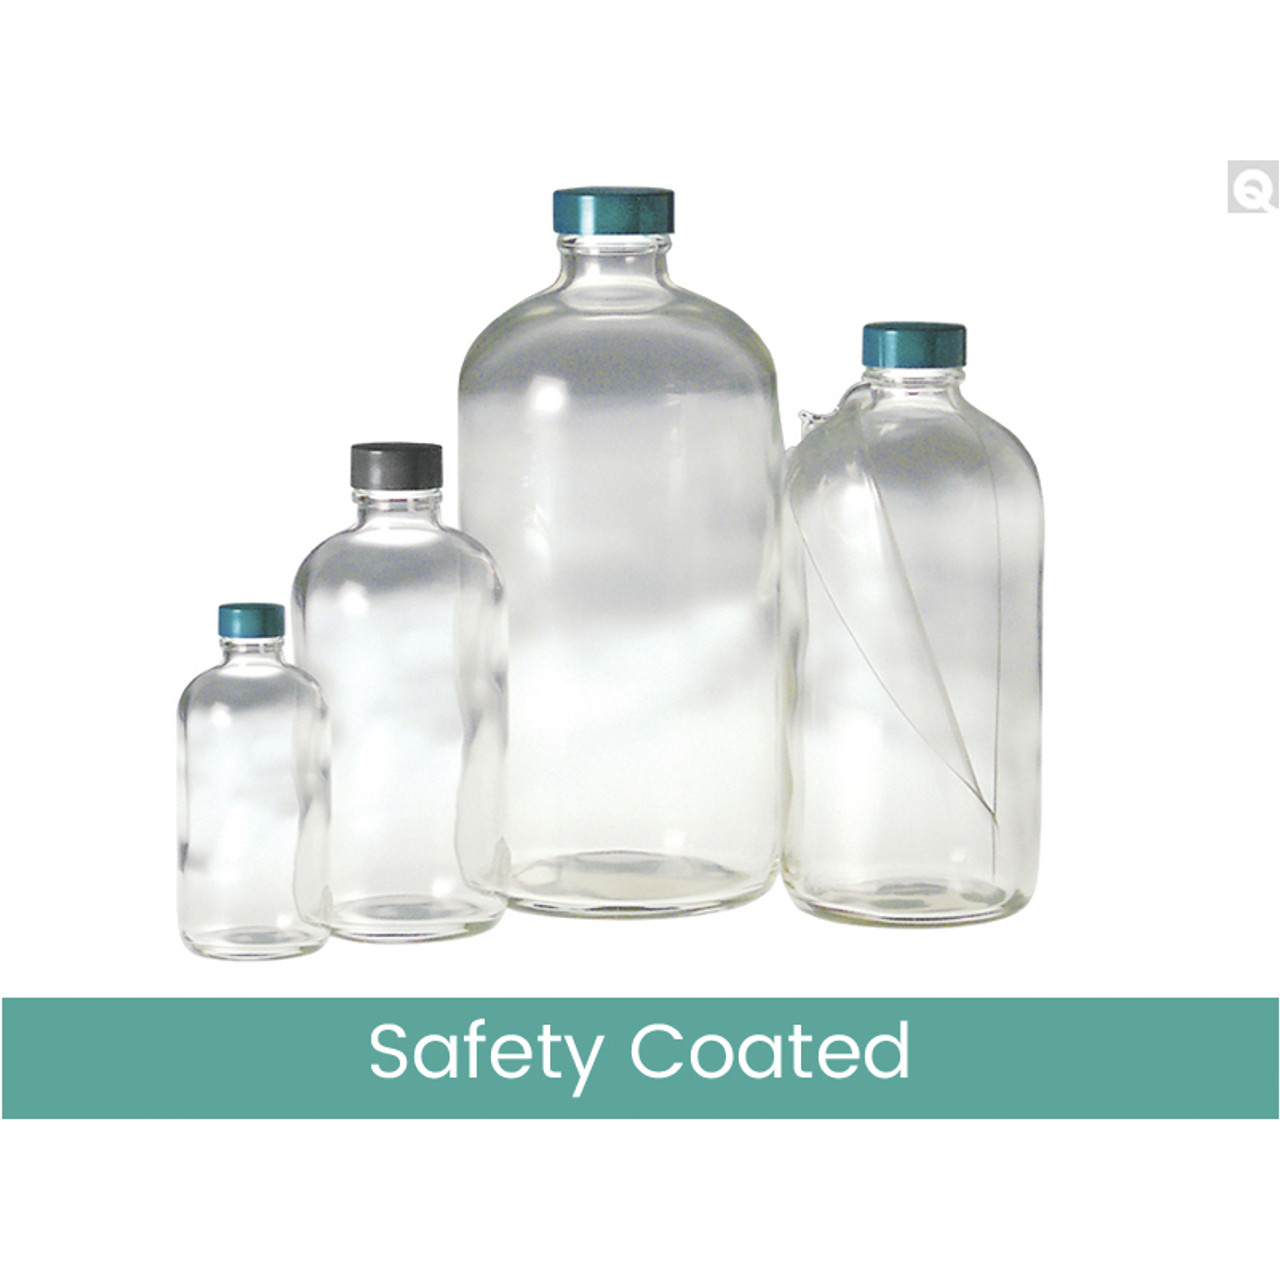 https://cdn11.bigcommerce.com/s-3yvzqa/images/stencil/1280x1280/products/33476/58037/Bottles_Safety_Coated_Boston-Rounds_Clear__01819.1552419859.jpg?c=2